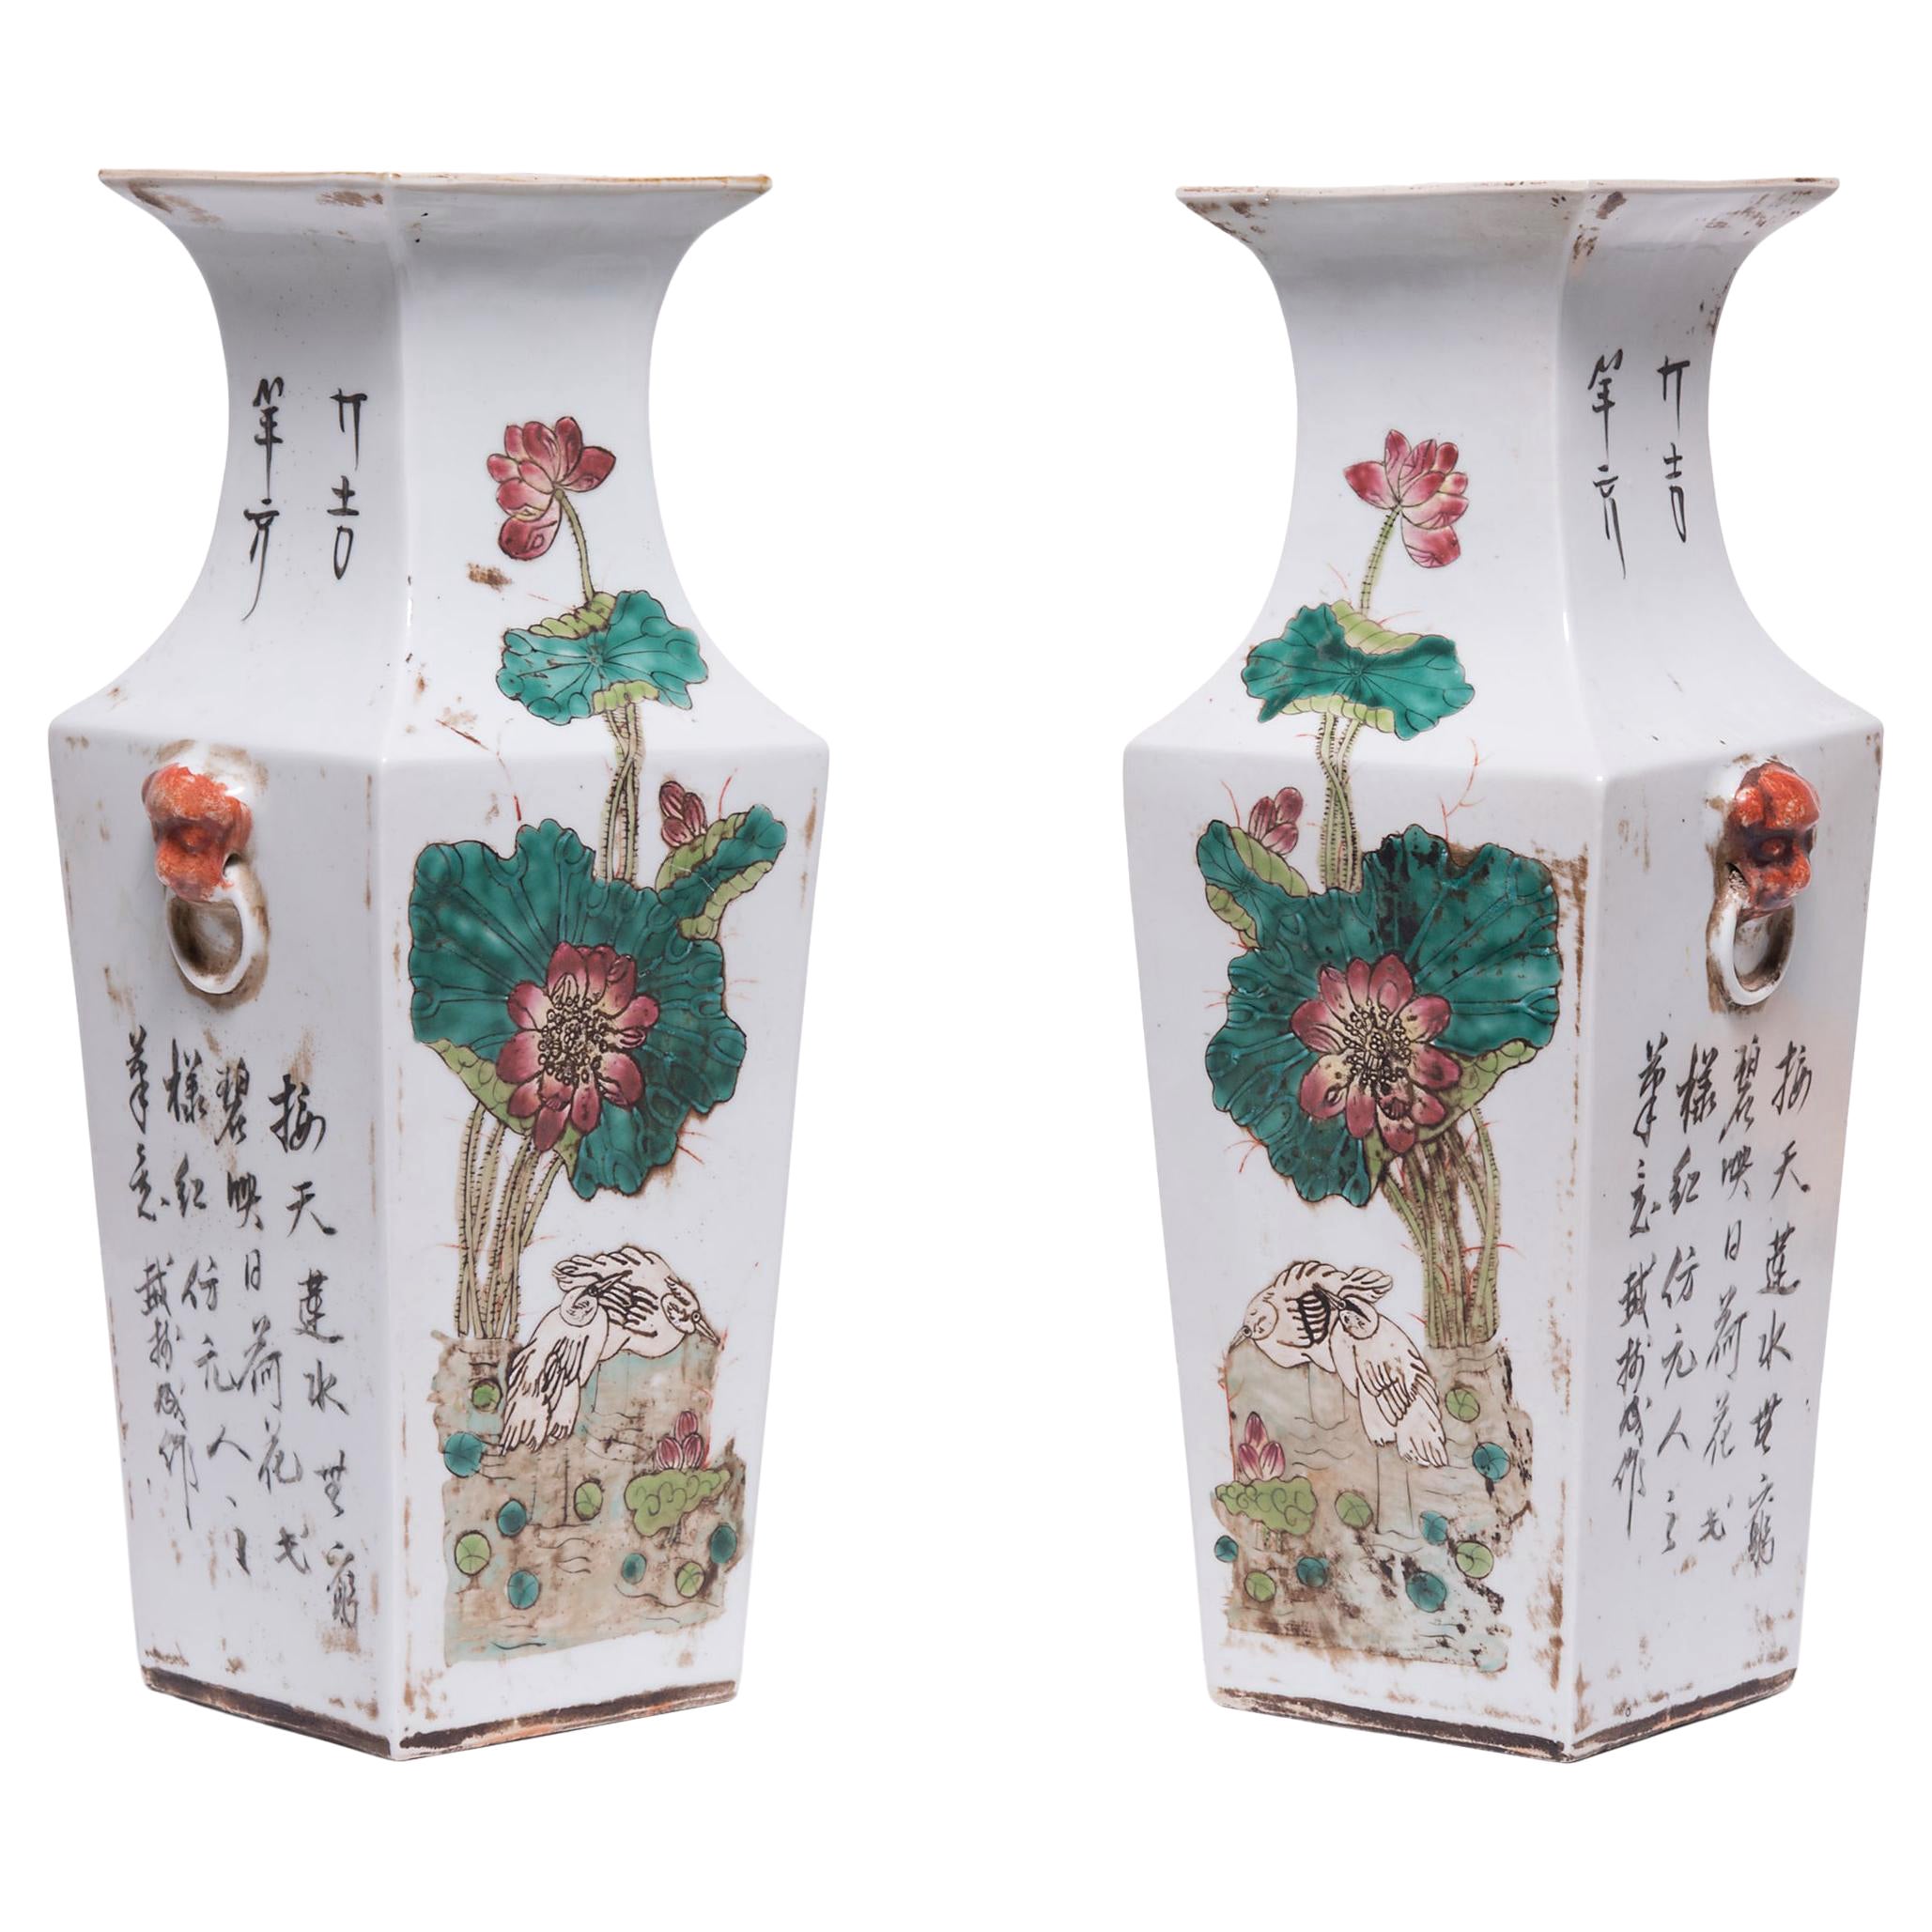 Pair of Chinese Squared Fantail Vases with Egrets Beneath Lotus